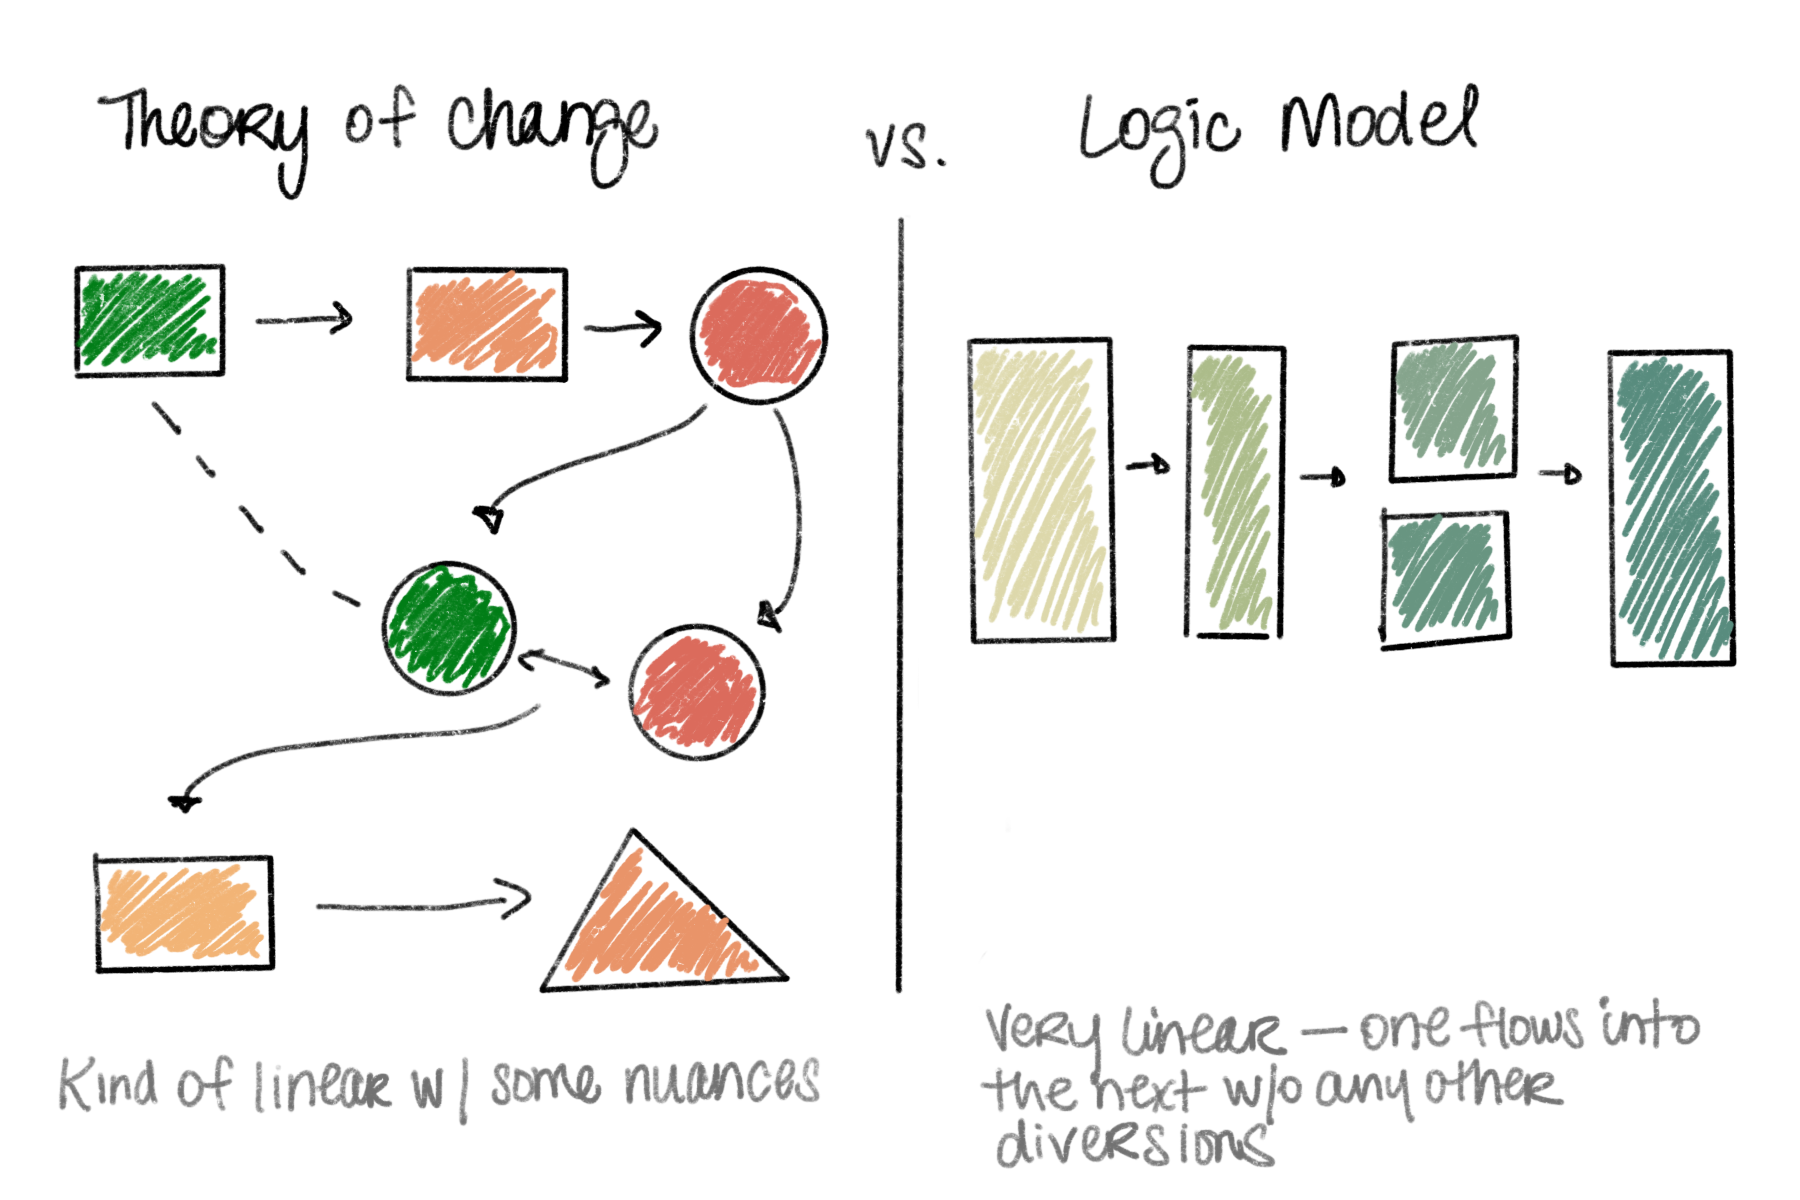 A drawn diagram with squares, circles and triangles in different colors as a theory of change on the left and another drawn diagram of just rectangles in gradient shades of green as the logic model on the right.